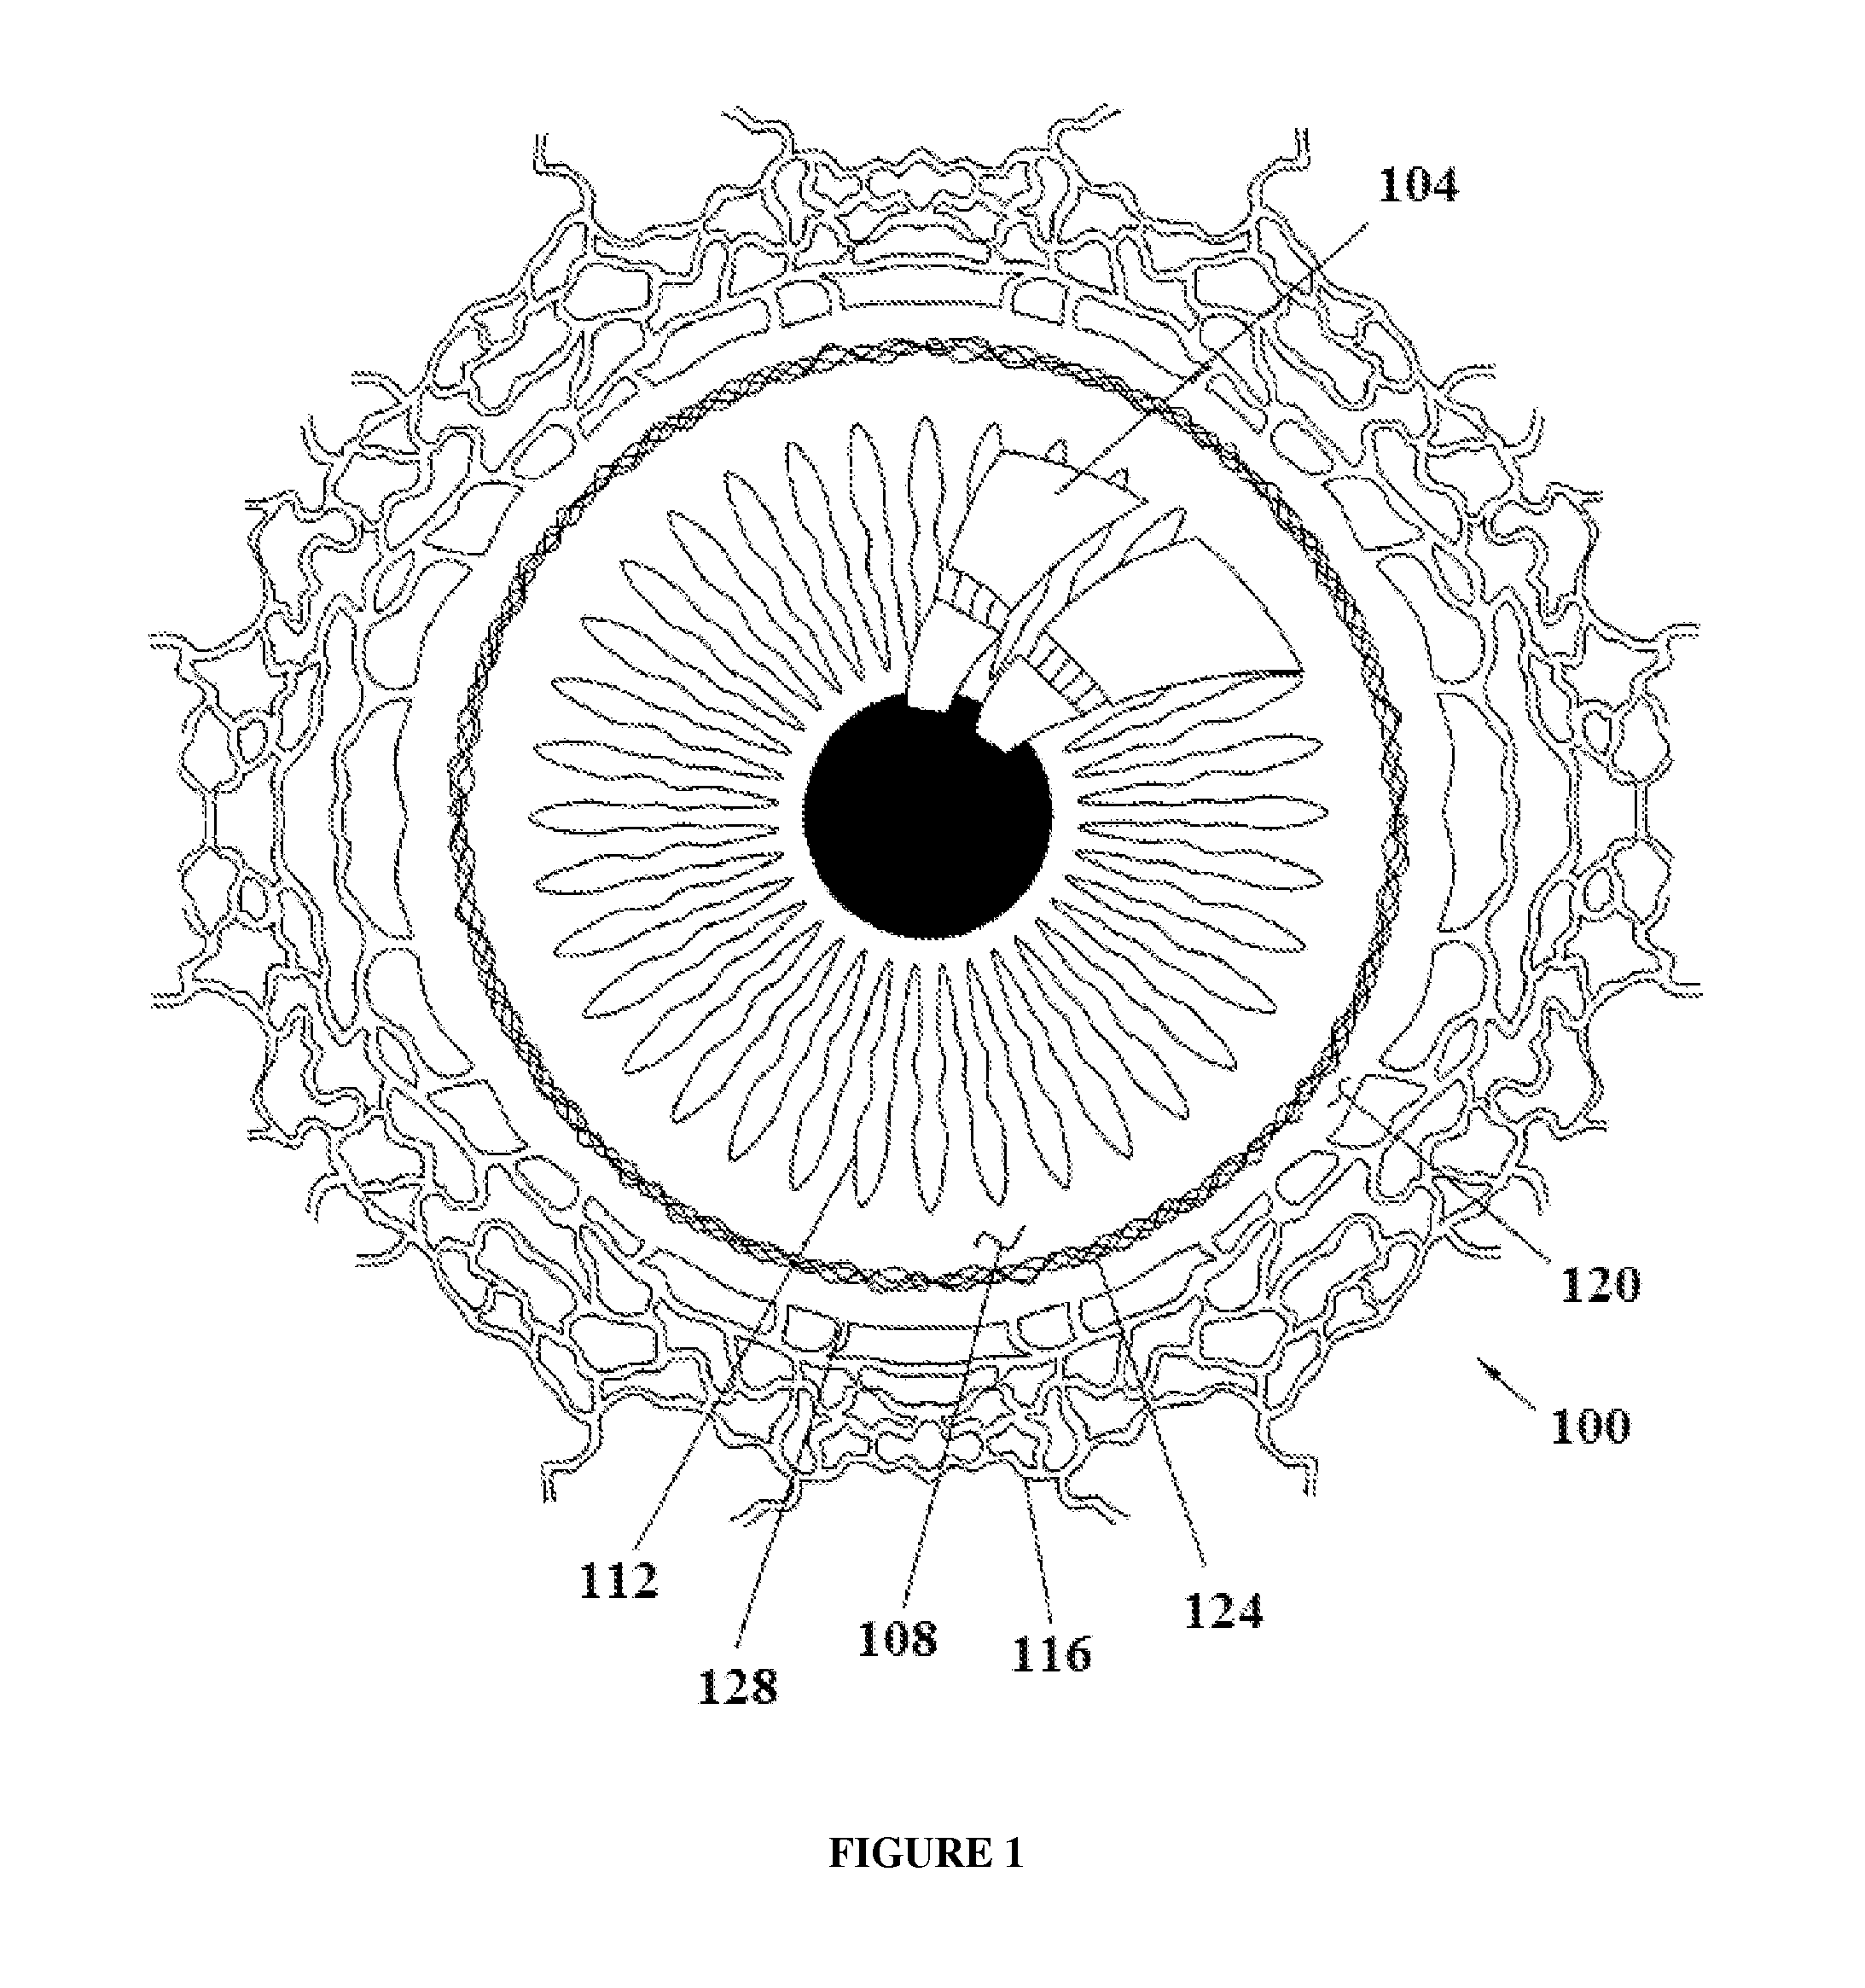 Implants for reducing intraocular pressure